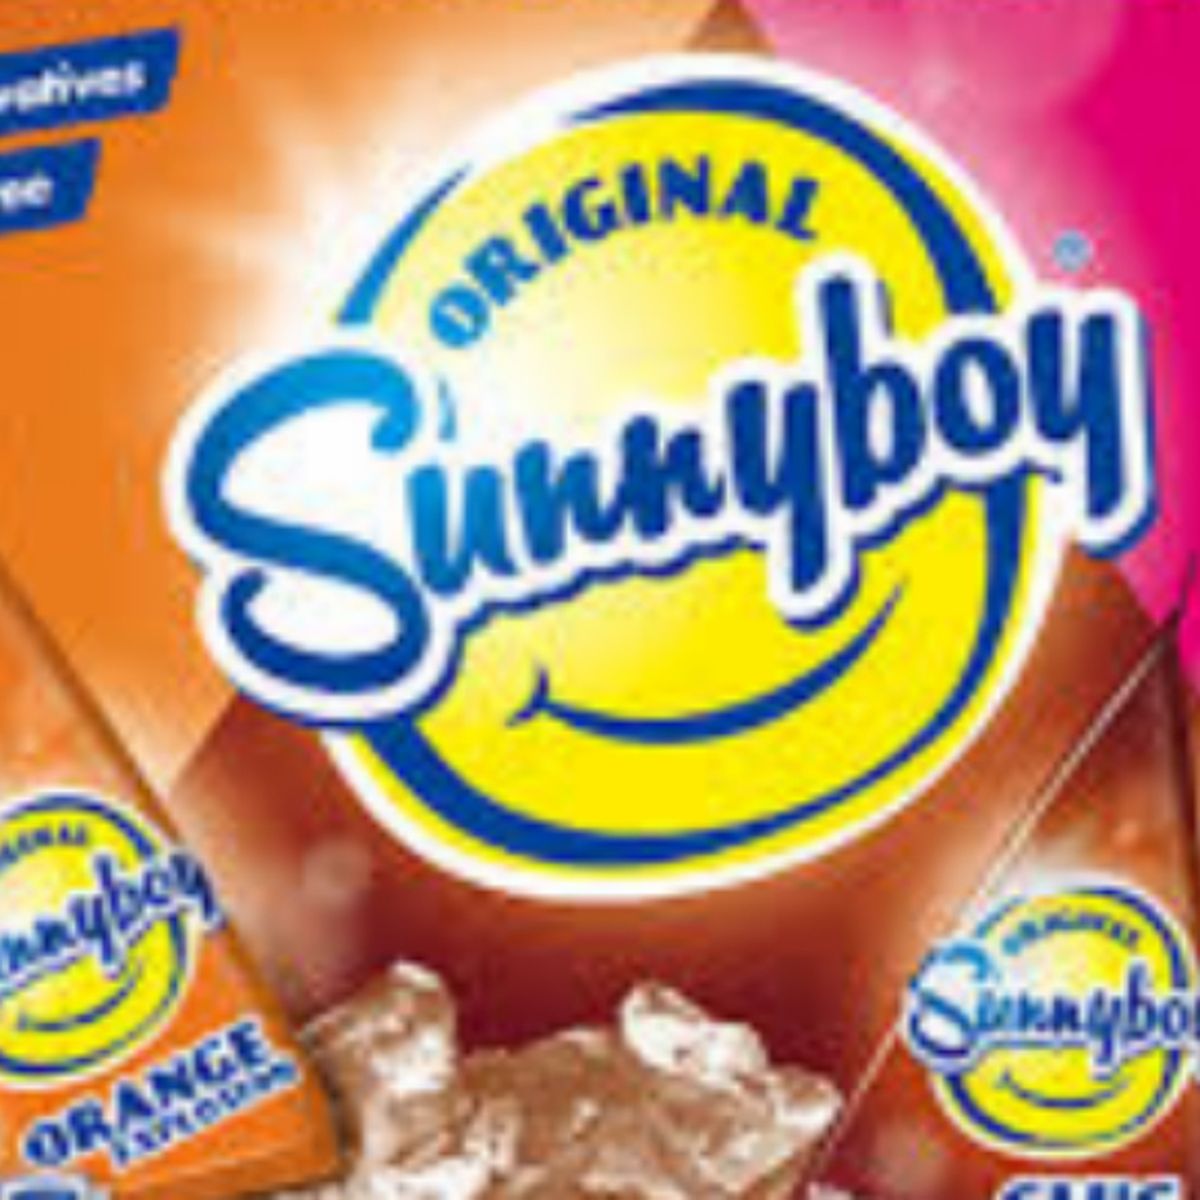 When did Sunnyboys get discontinued?